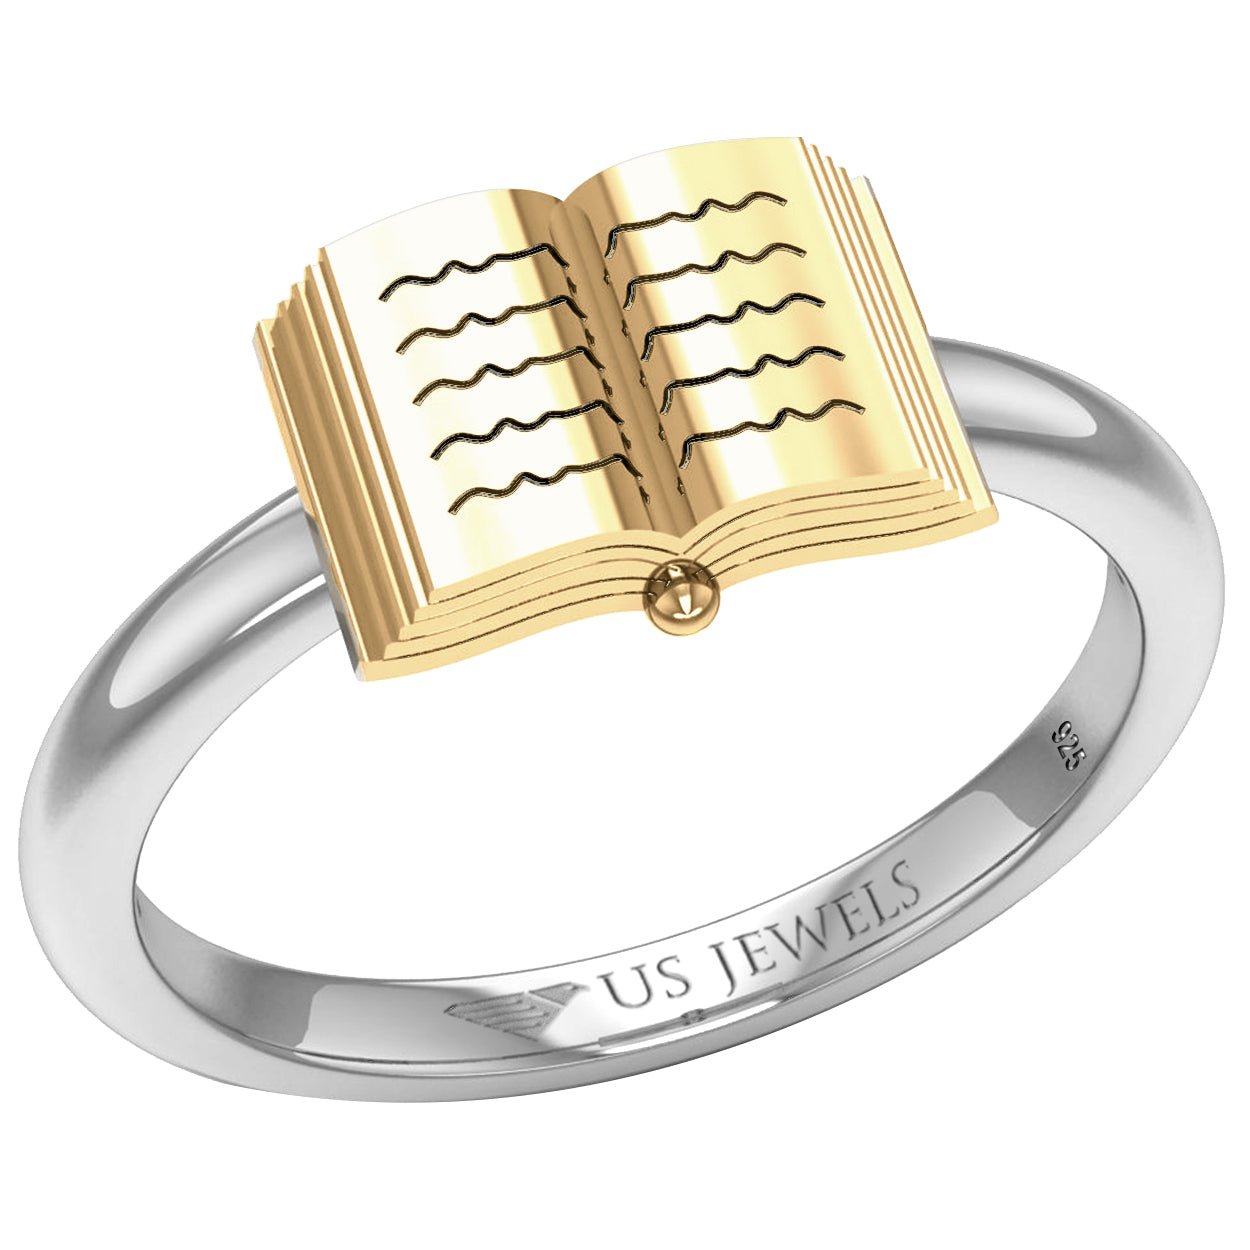 Ladies 925 Sterling Silver or Two Tone Holy Bible Ring - US Jewels